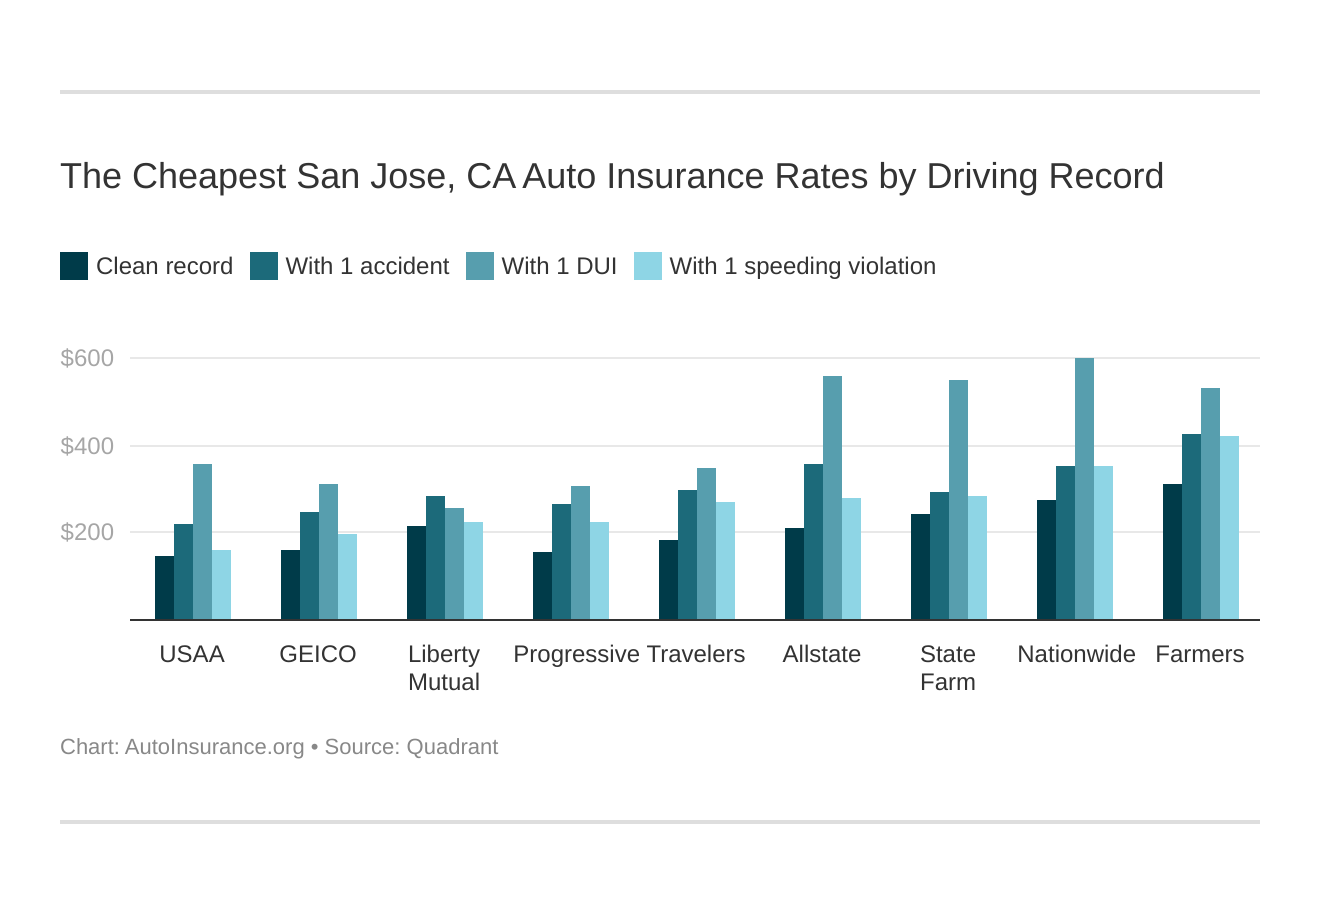 The Cheapest San Jose, CA Auto Insurance Rates by Driving Record